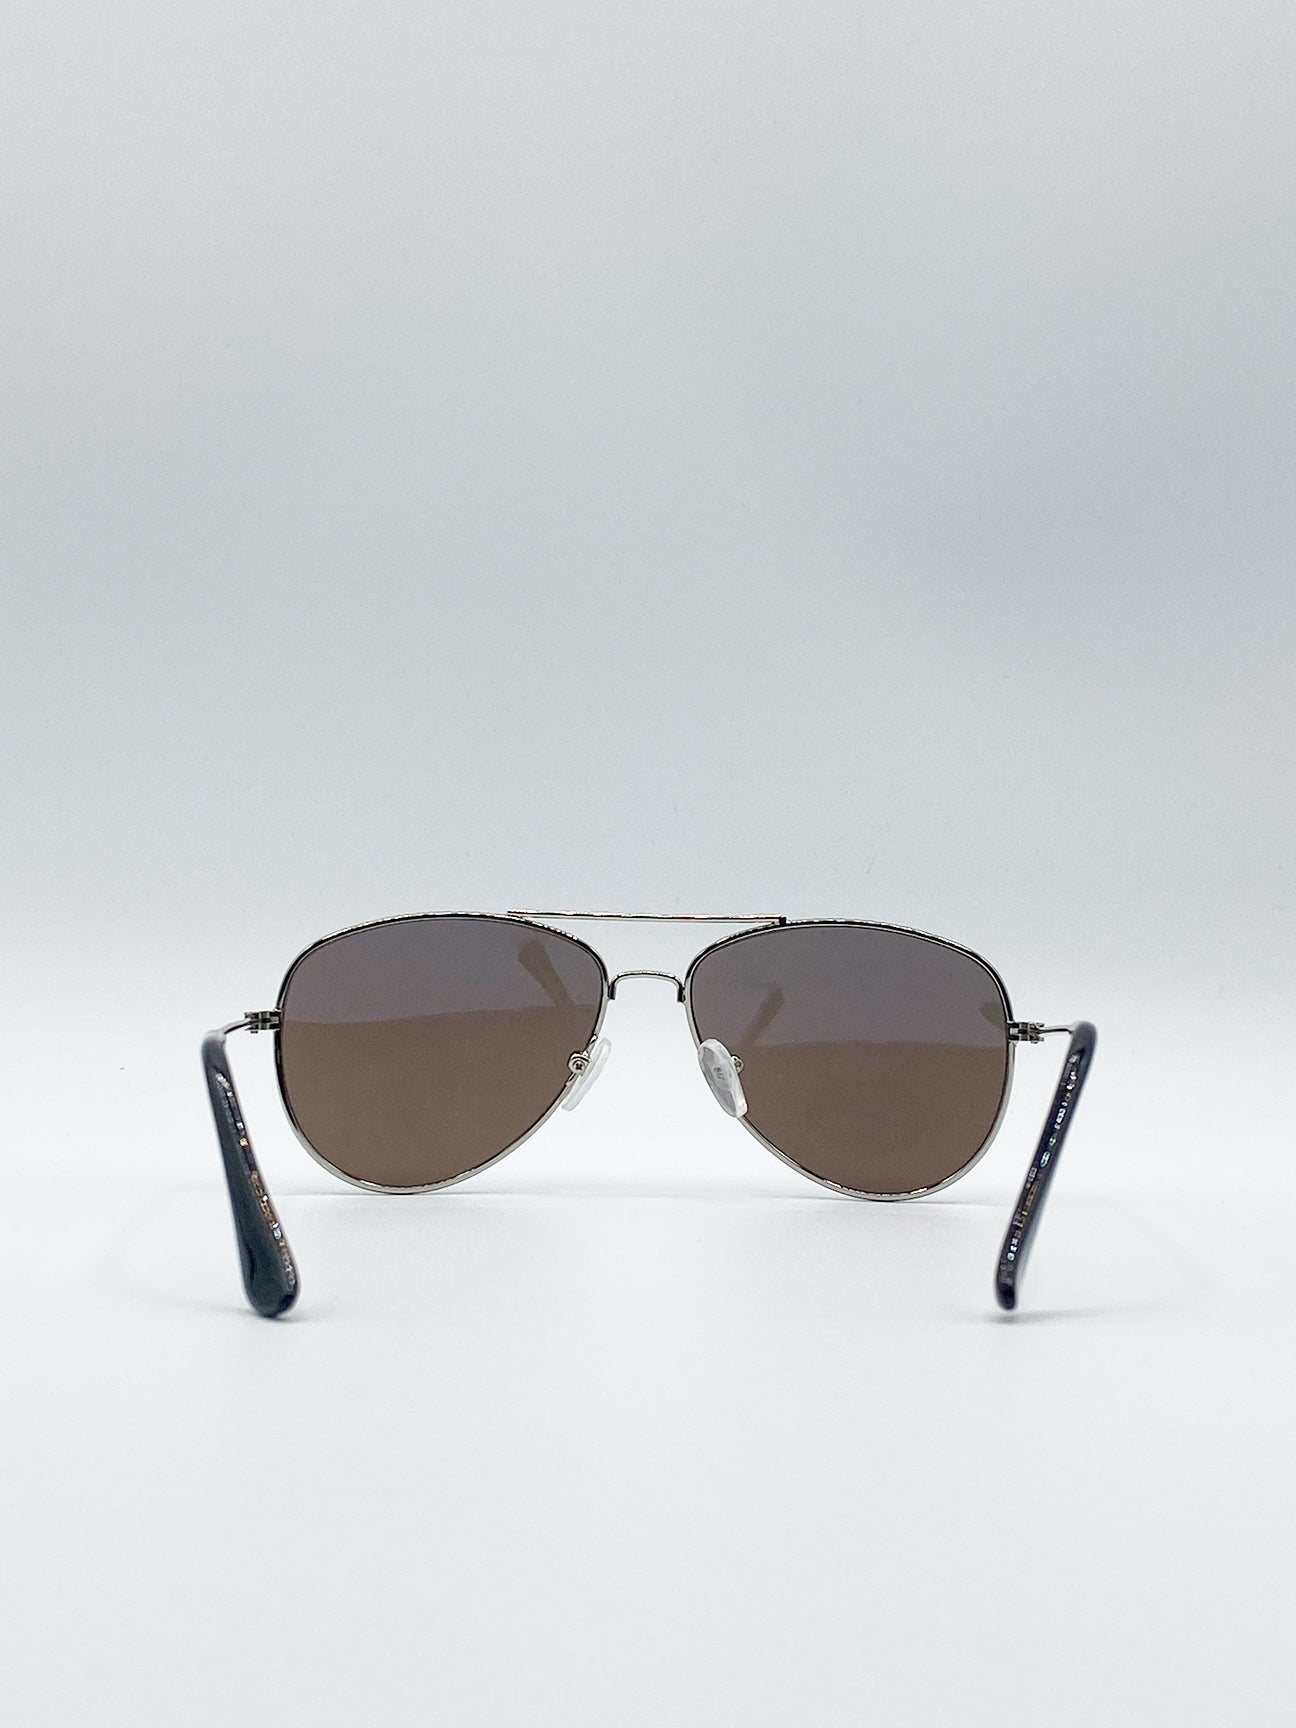 Kids Silver Frame Aviator Sunglasses With Blue Mirrored Lenses